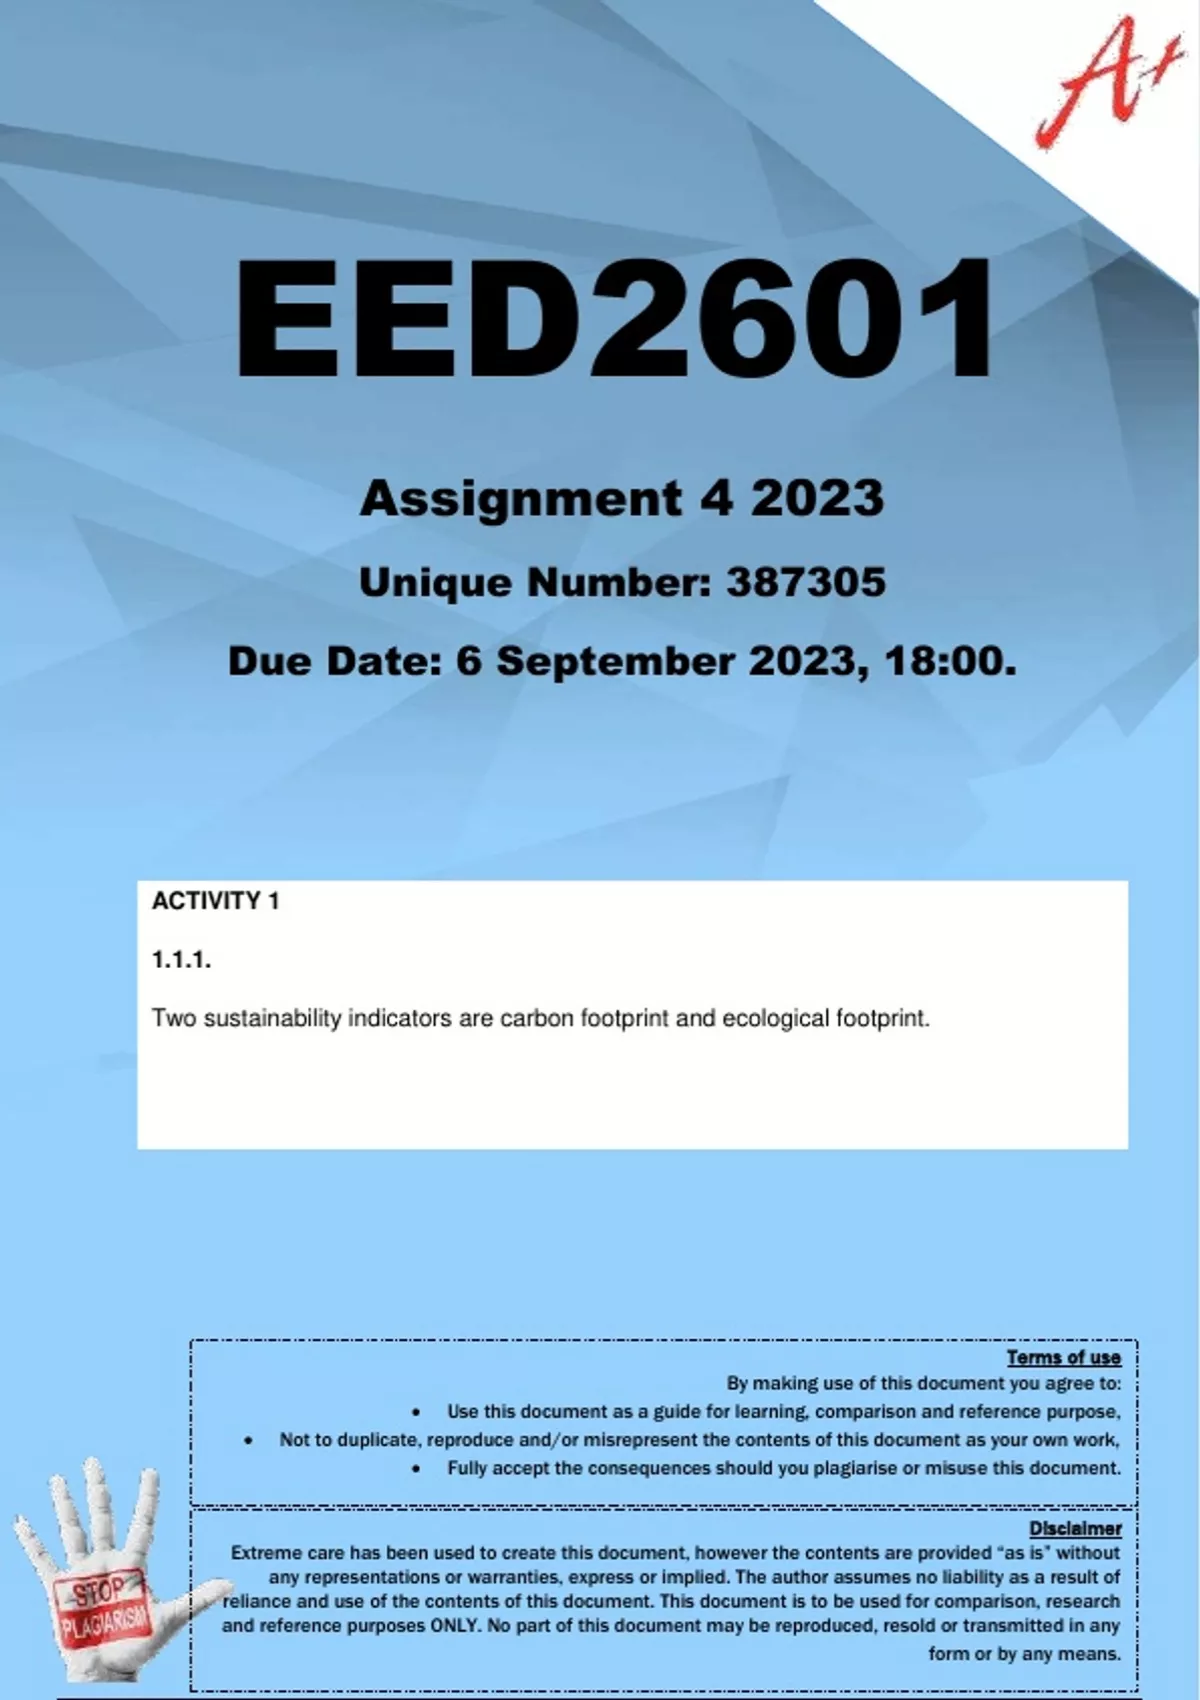 eed2601 assignment 4 answers pdf download